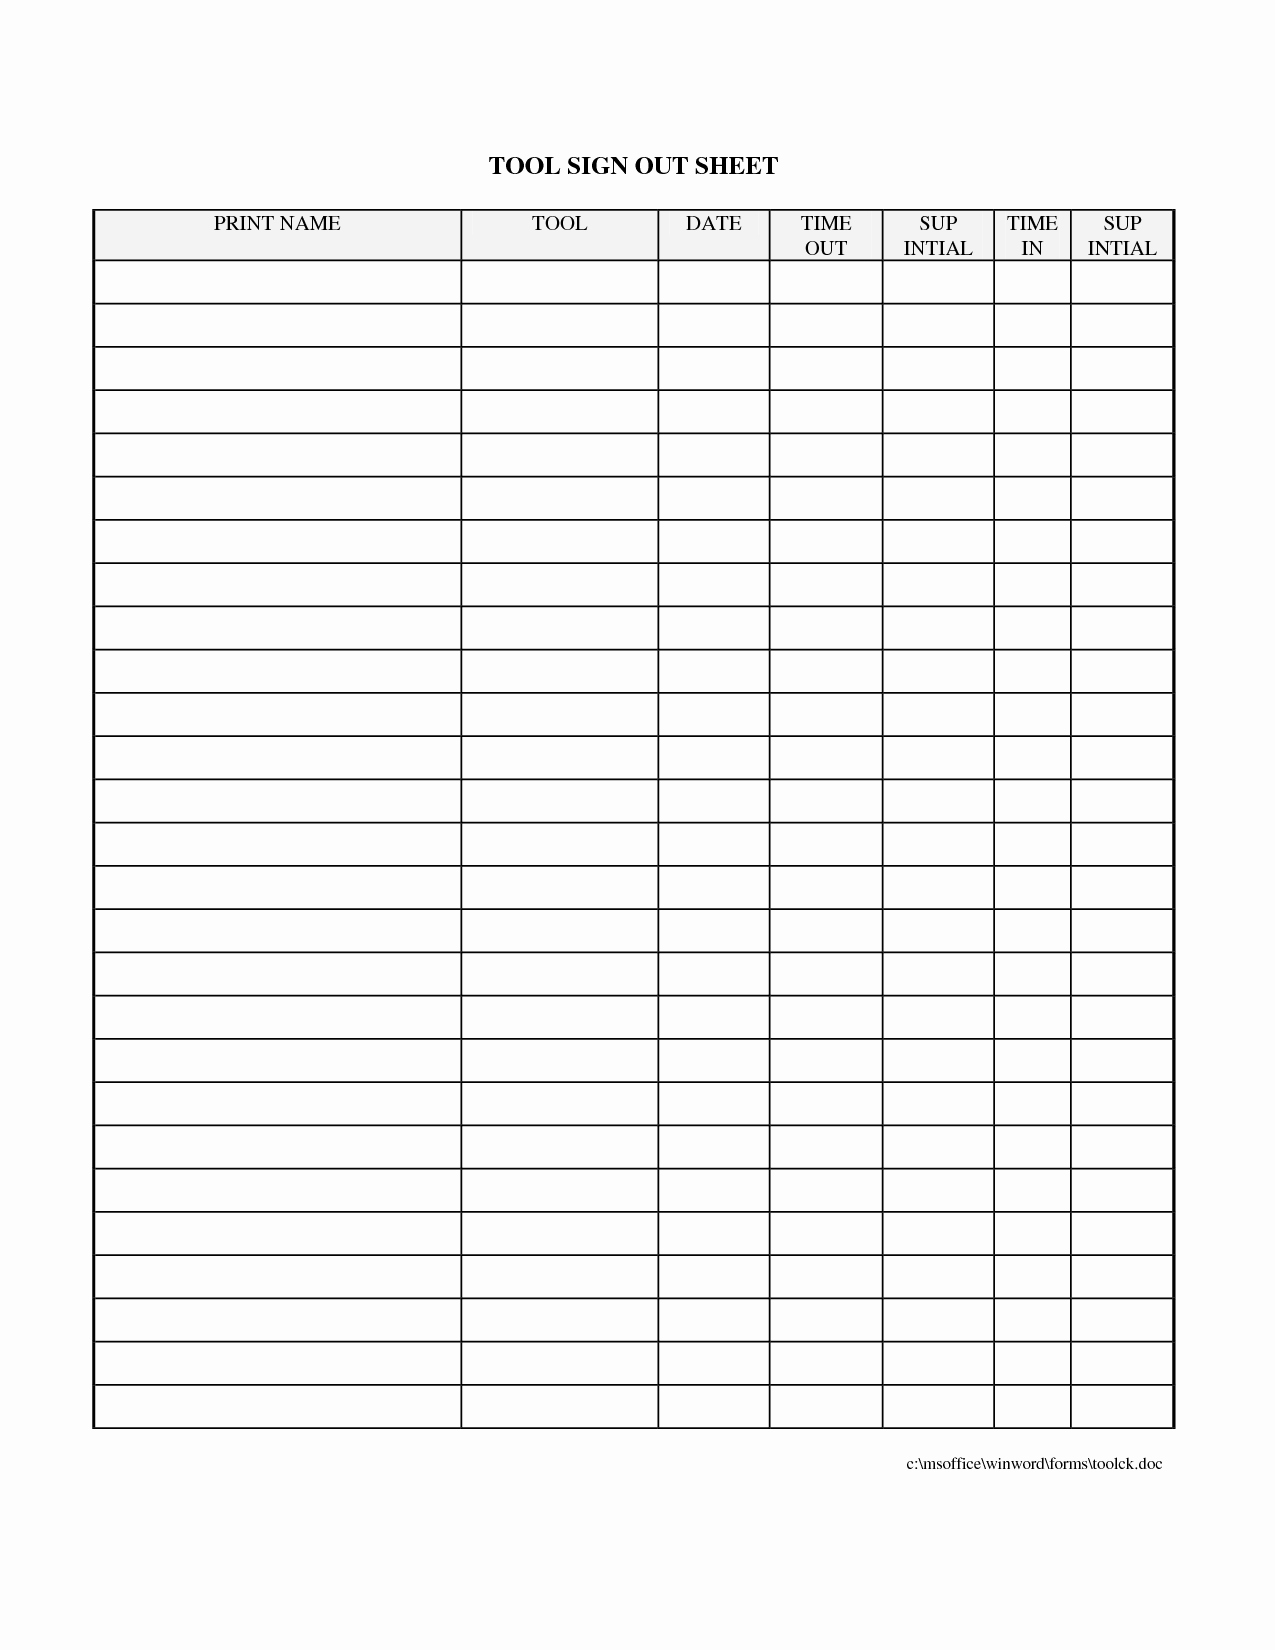 Restroom Sign Out Sheet New Printable Sign Out Sheet Template the Best Car Hd Wallpaper Summer School Haiti